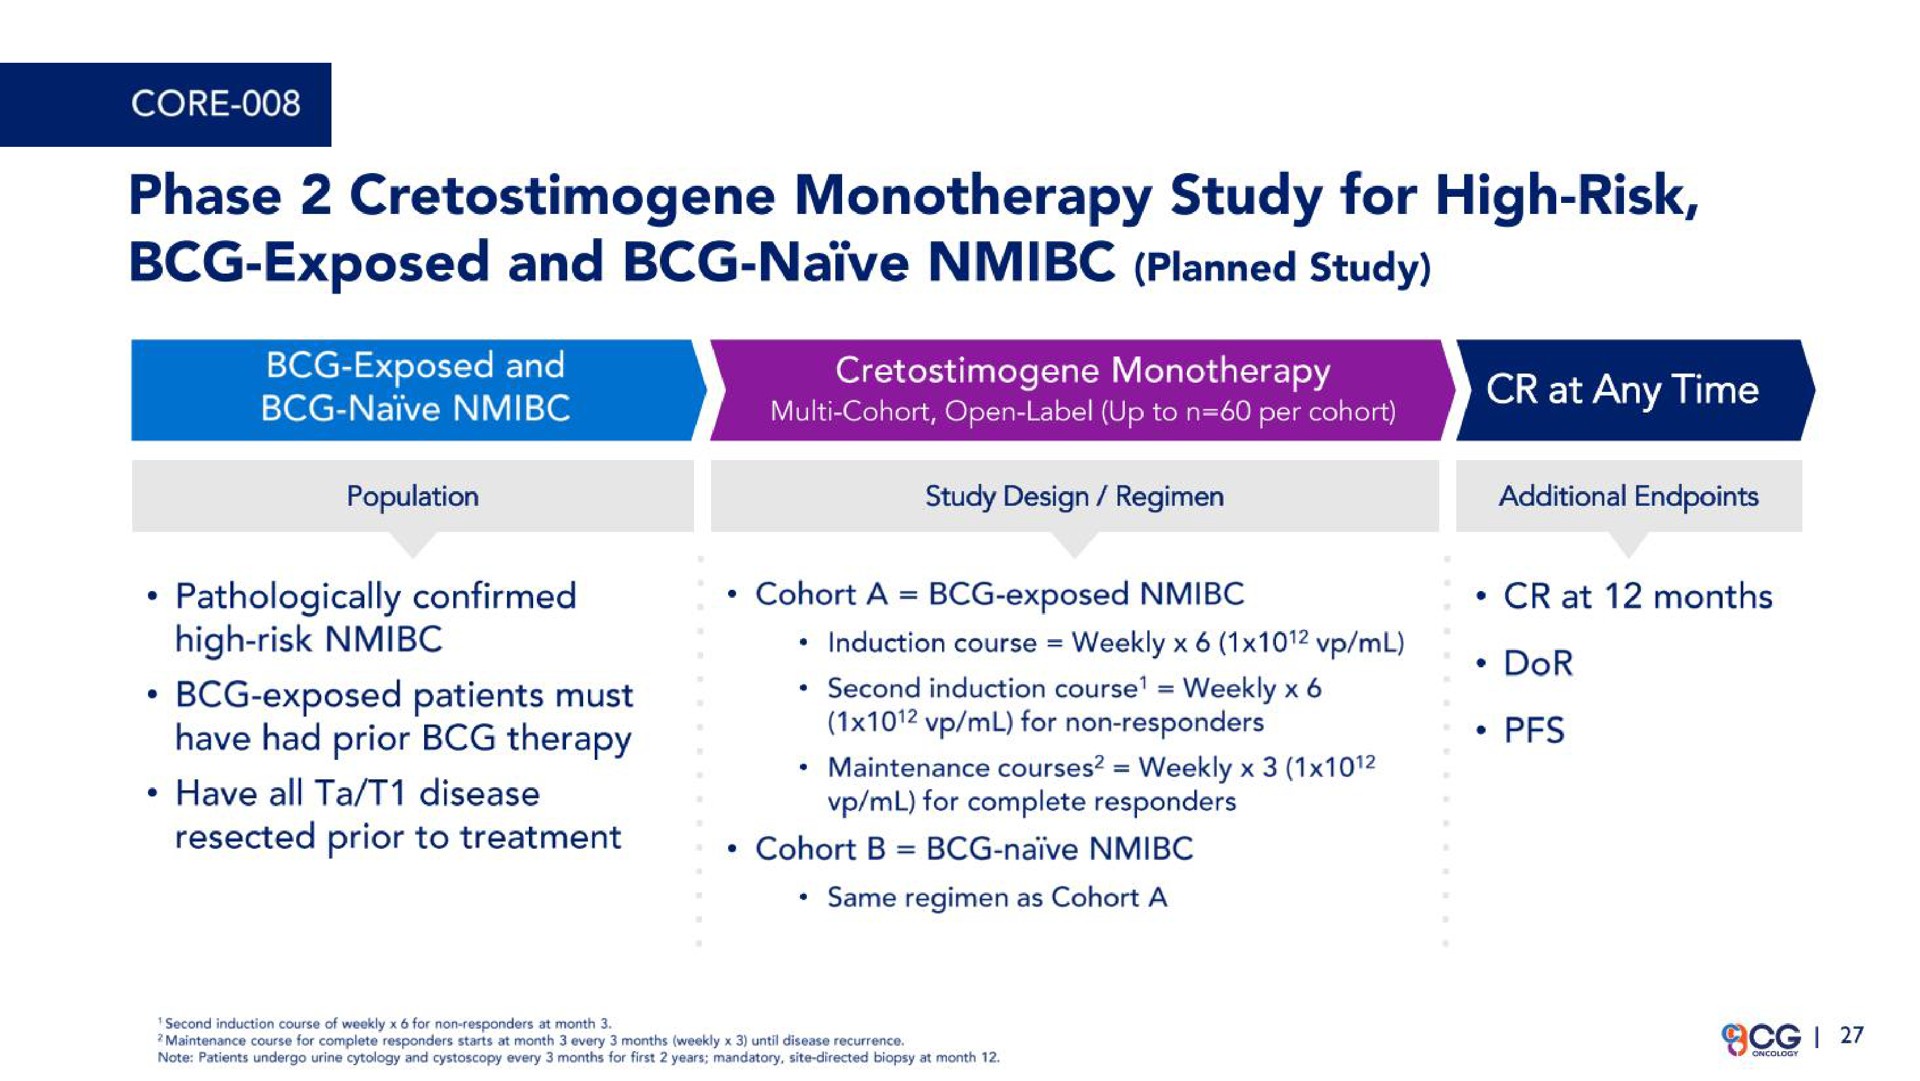 phase study for high risk exposed and naive planned study | CG Oncology